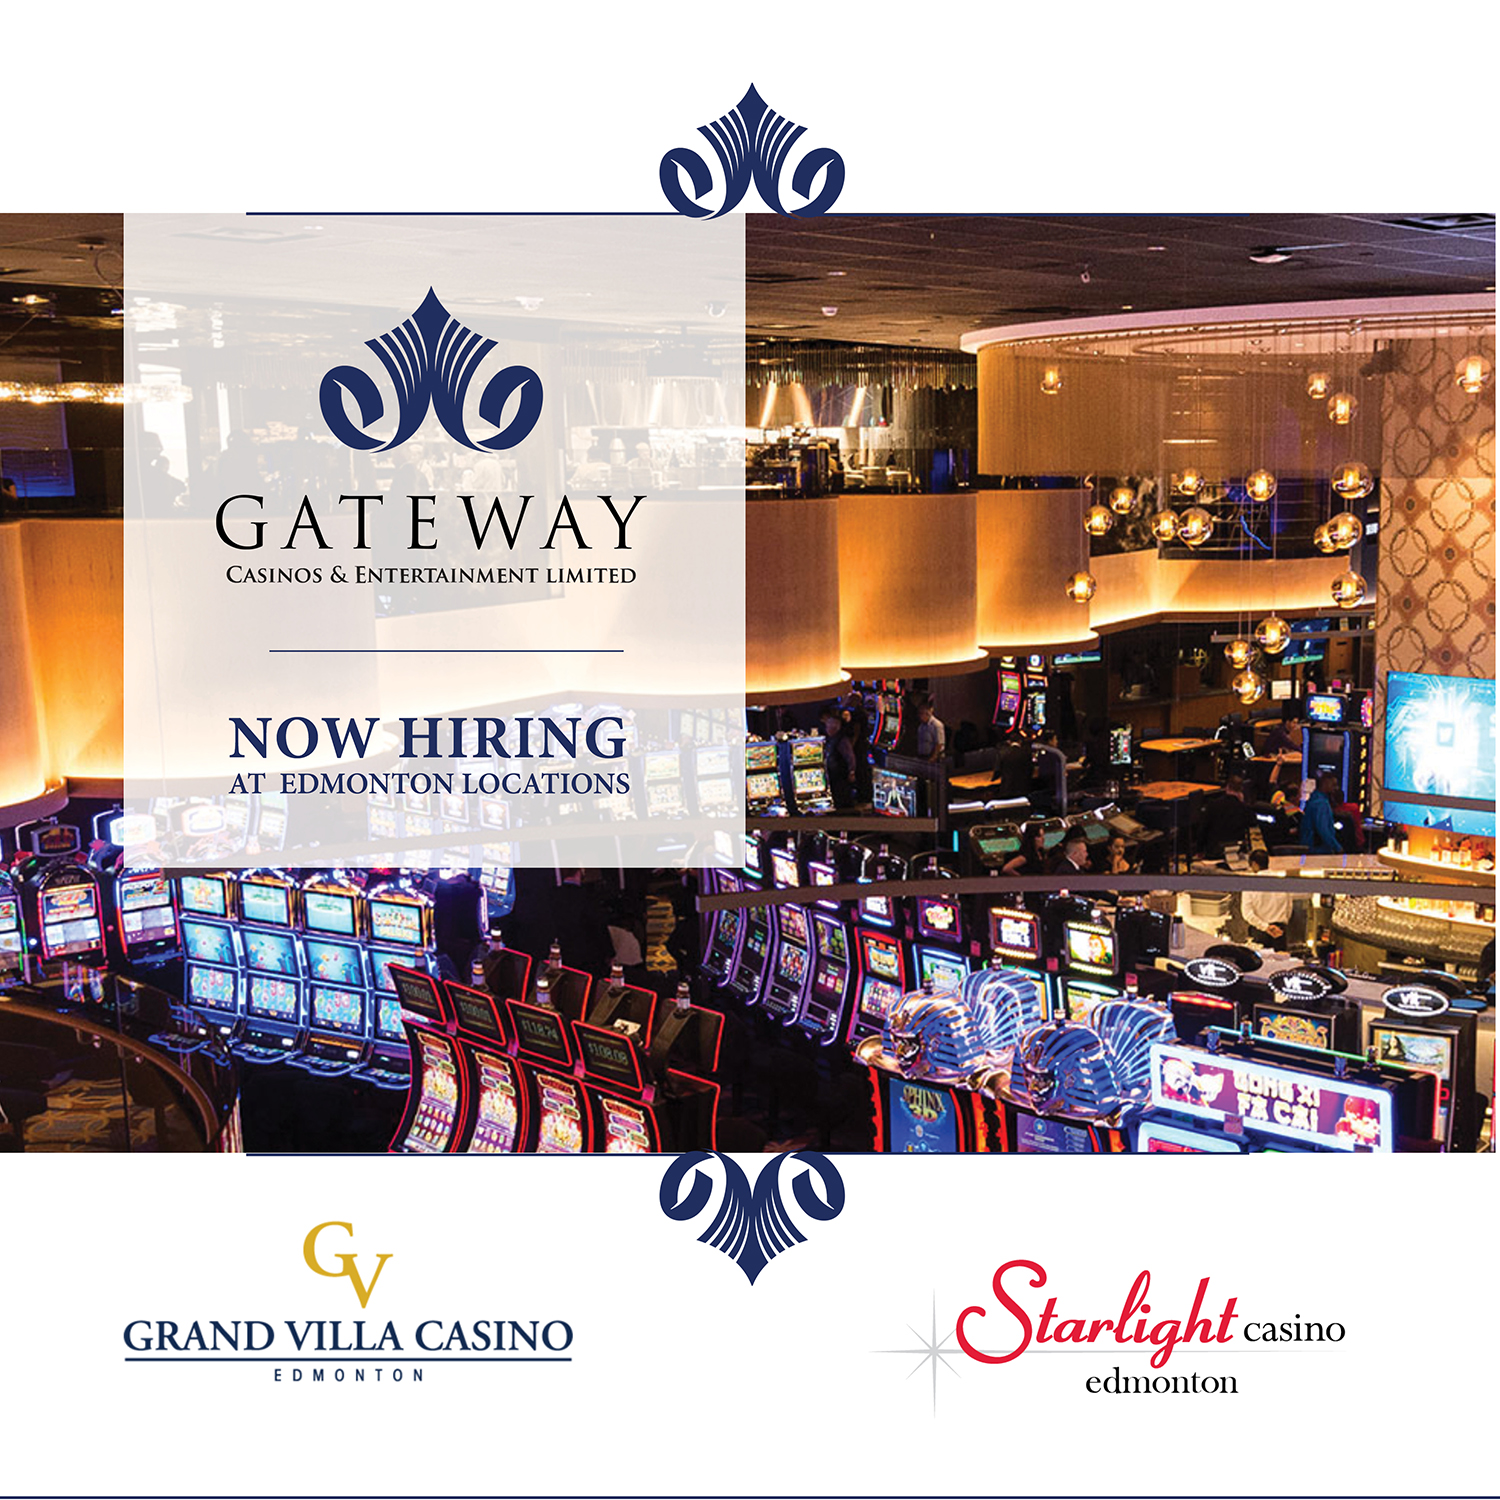 image of a casino with the gateway casino logo and the words "now hiring: Edmonton locations". Below the image are the logs of Starlight Casino and Grande Villa casino.